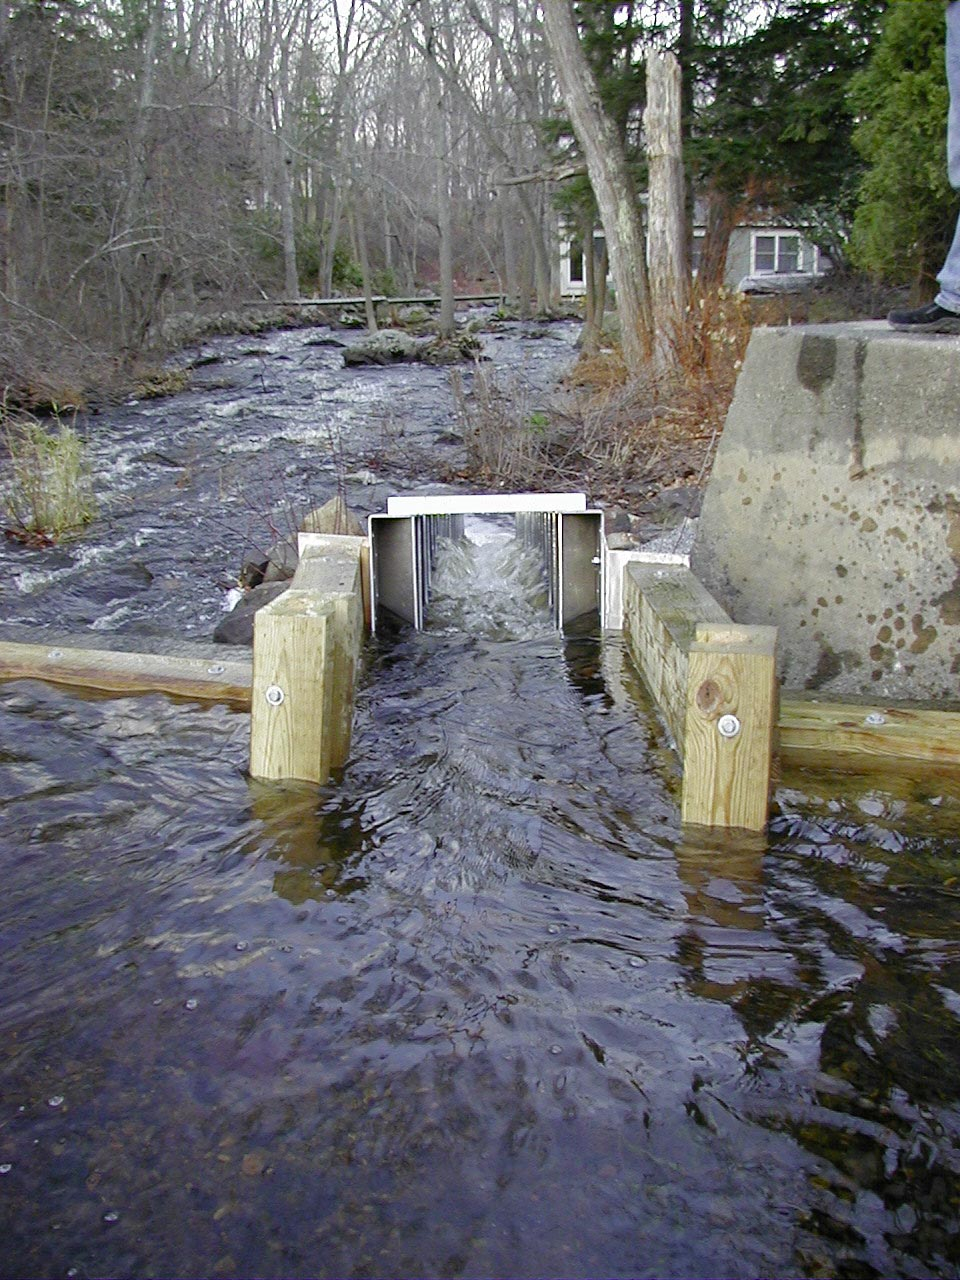 Immediately after installation of the fishway, water rushes through the AlaskanSteep Pass